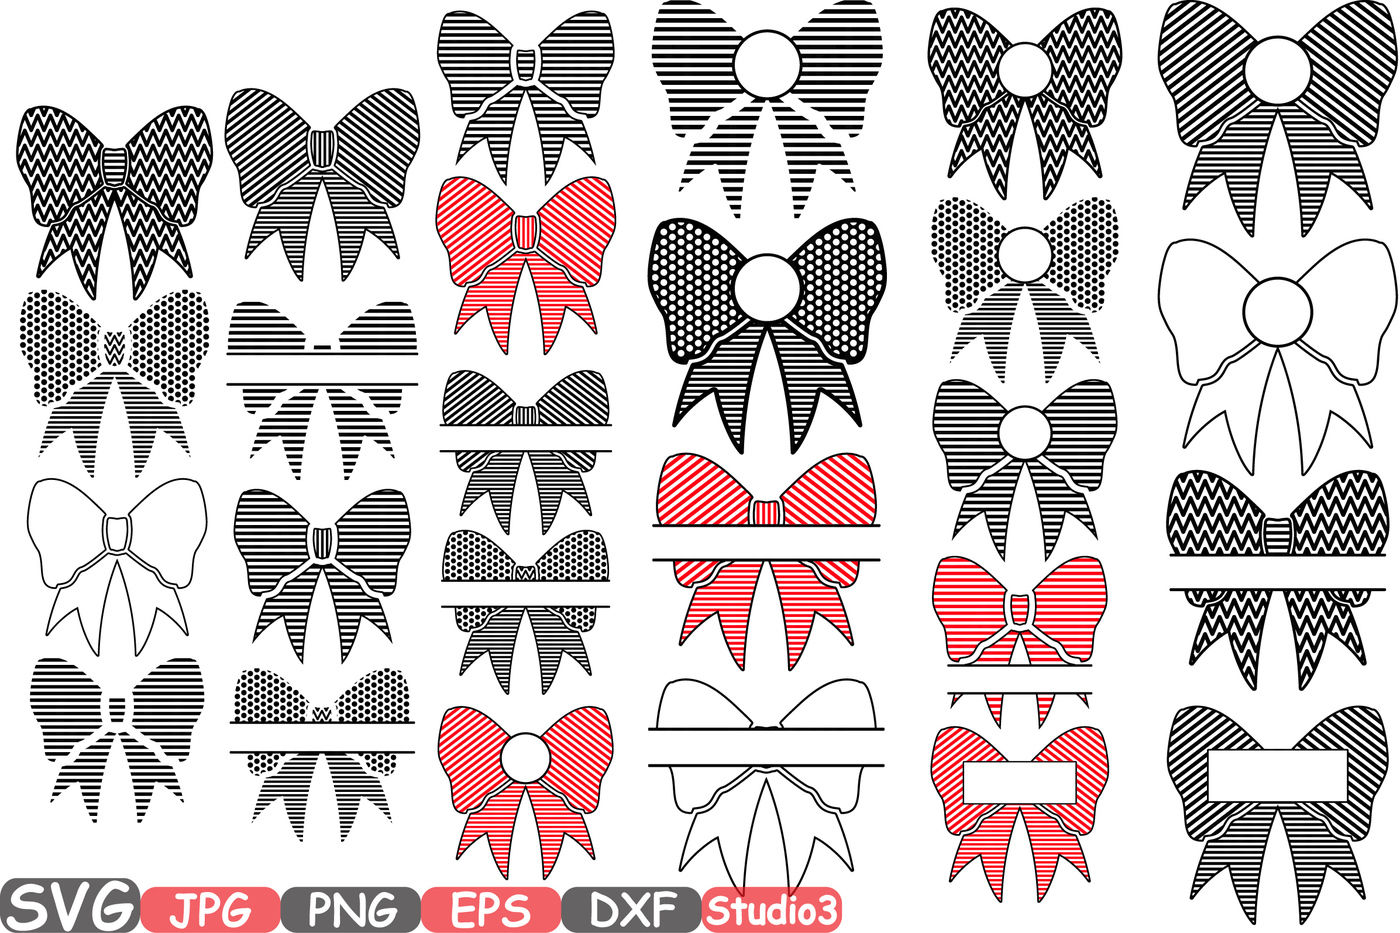 71+ Bow Svg Free - Download Free SVG Cut Files and Designs | Picartsvg